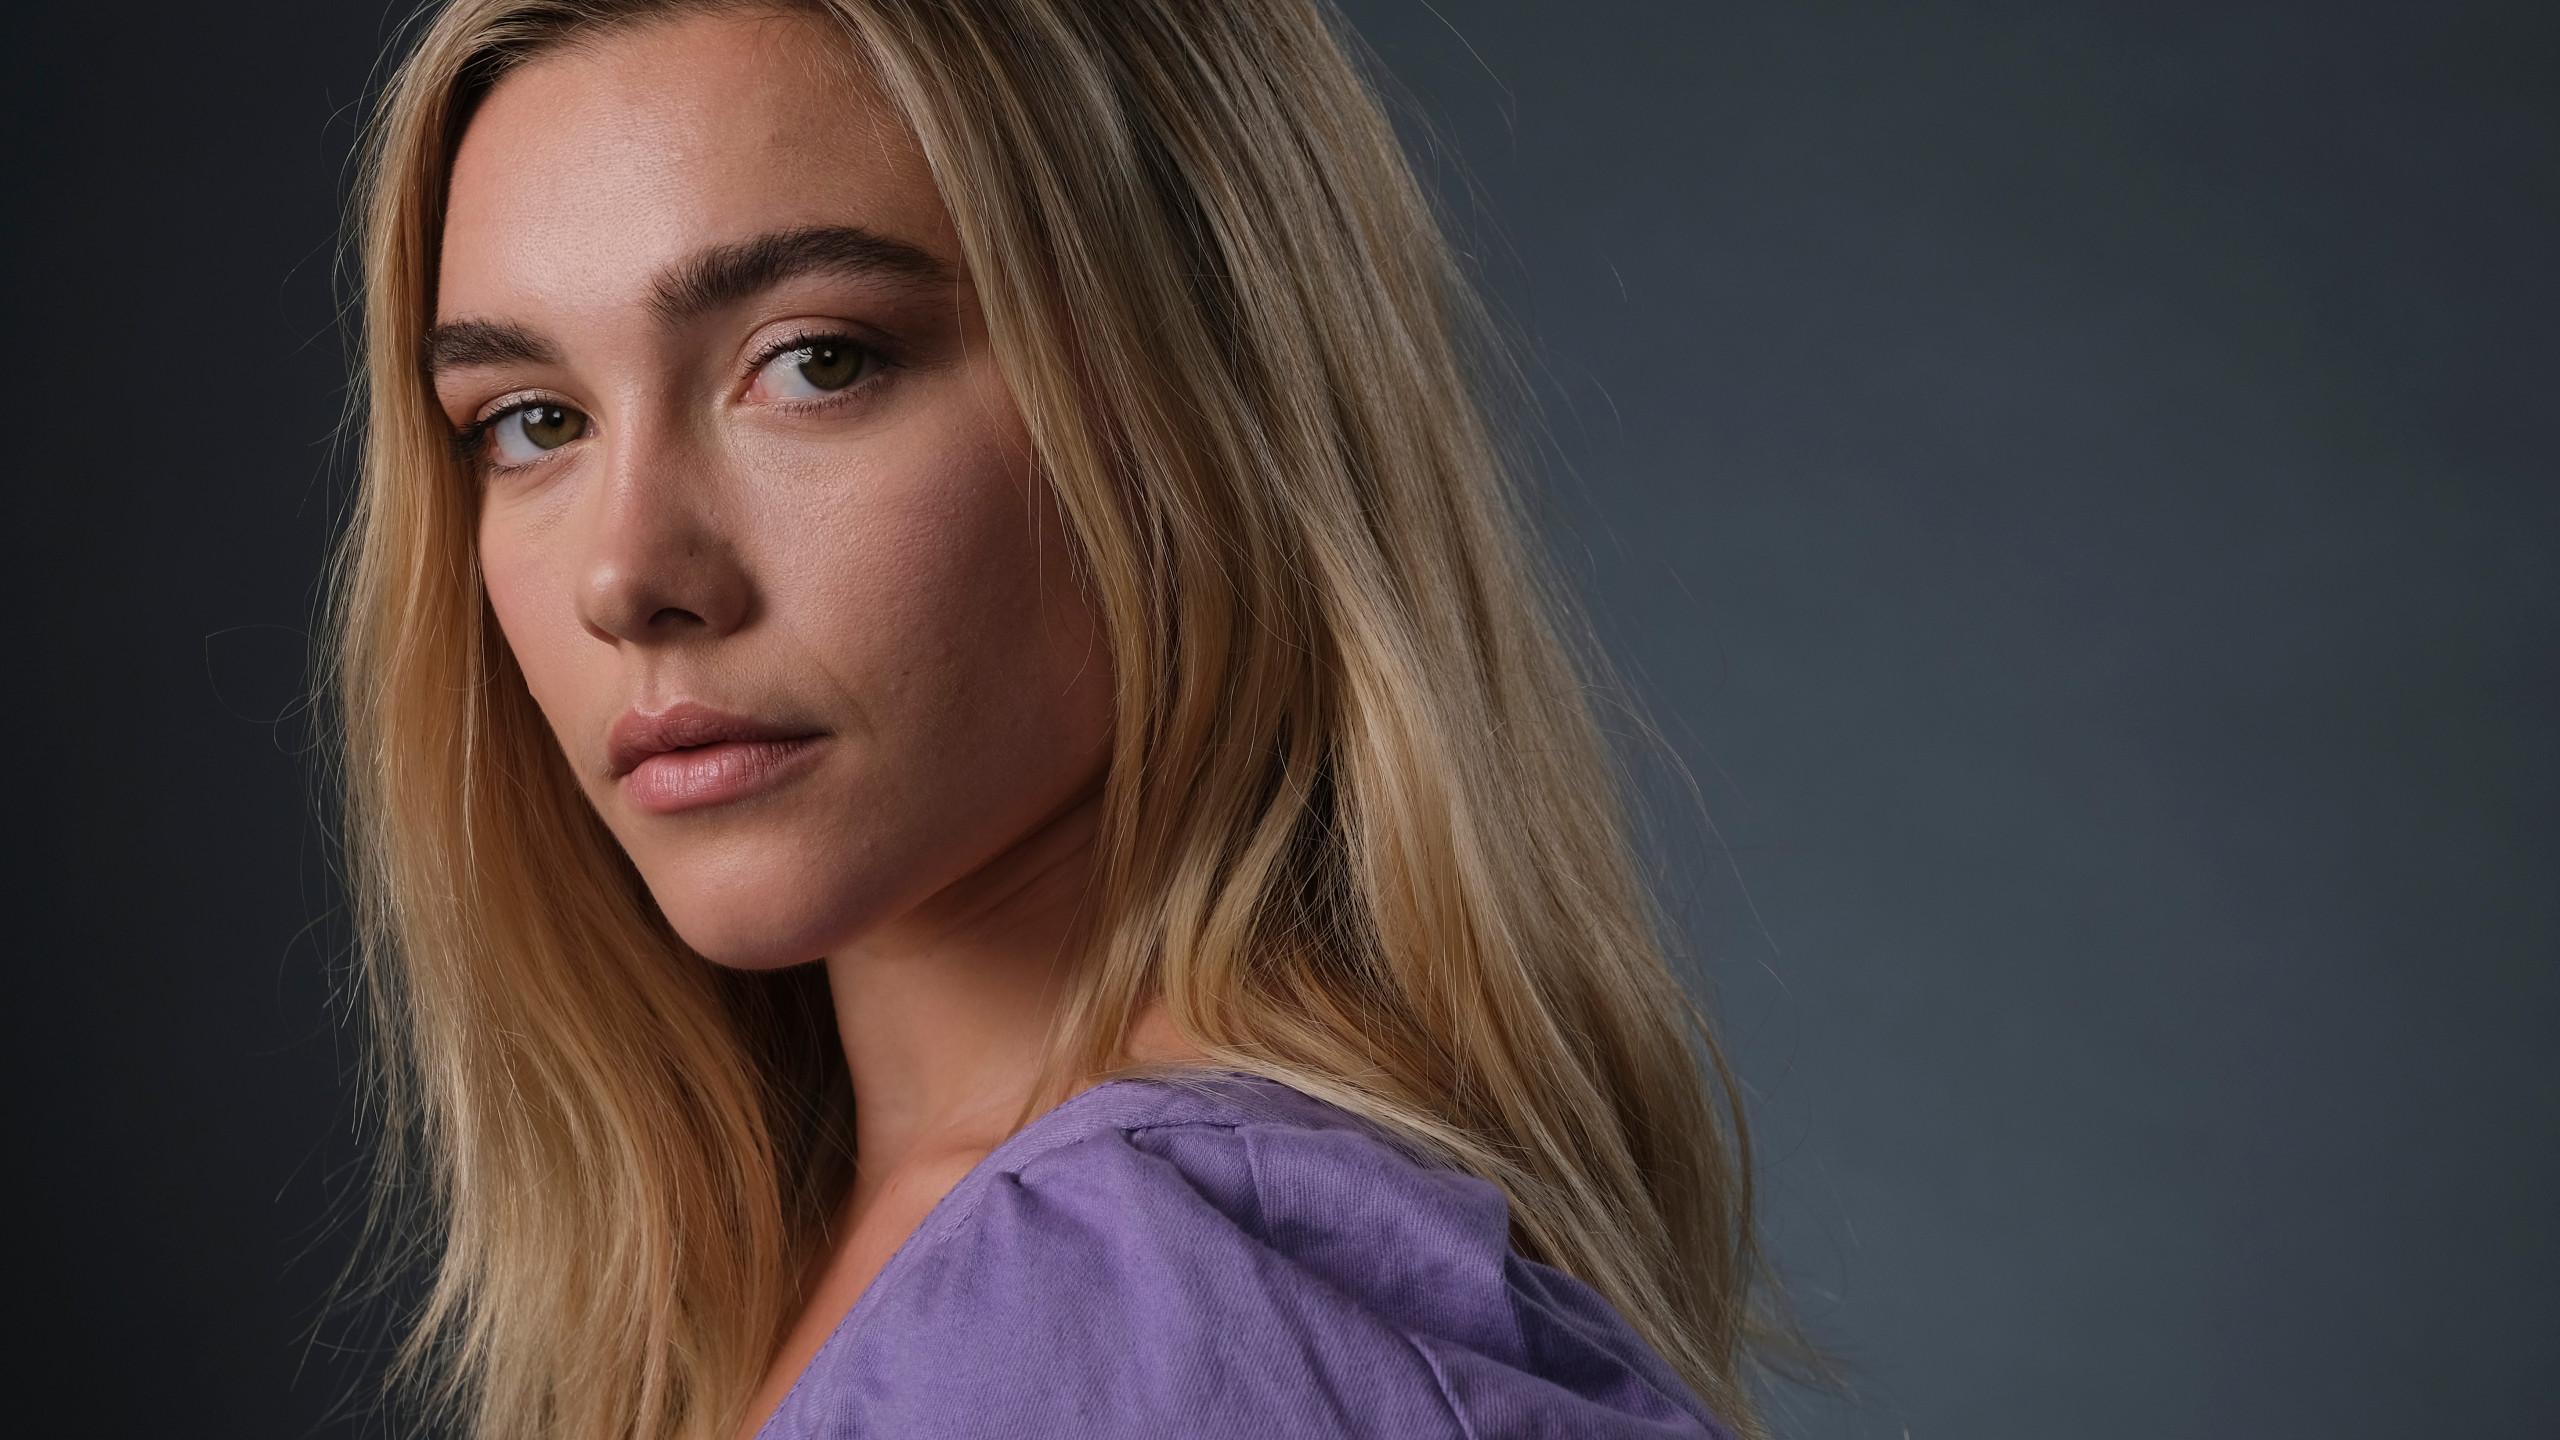 Wallpaper ID 359991  Celebrity Florence Pugh Phone Wallpaper Face  Actress English 1080x2340 free download